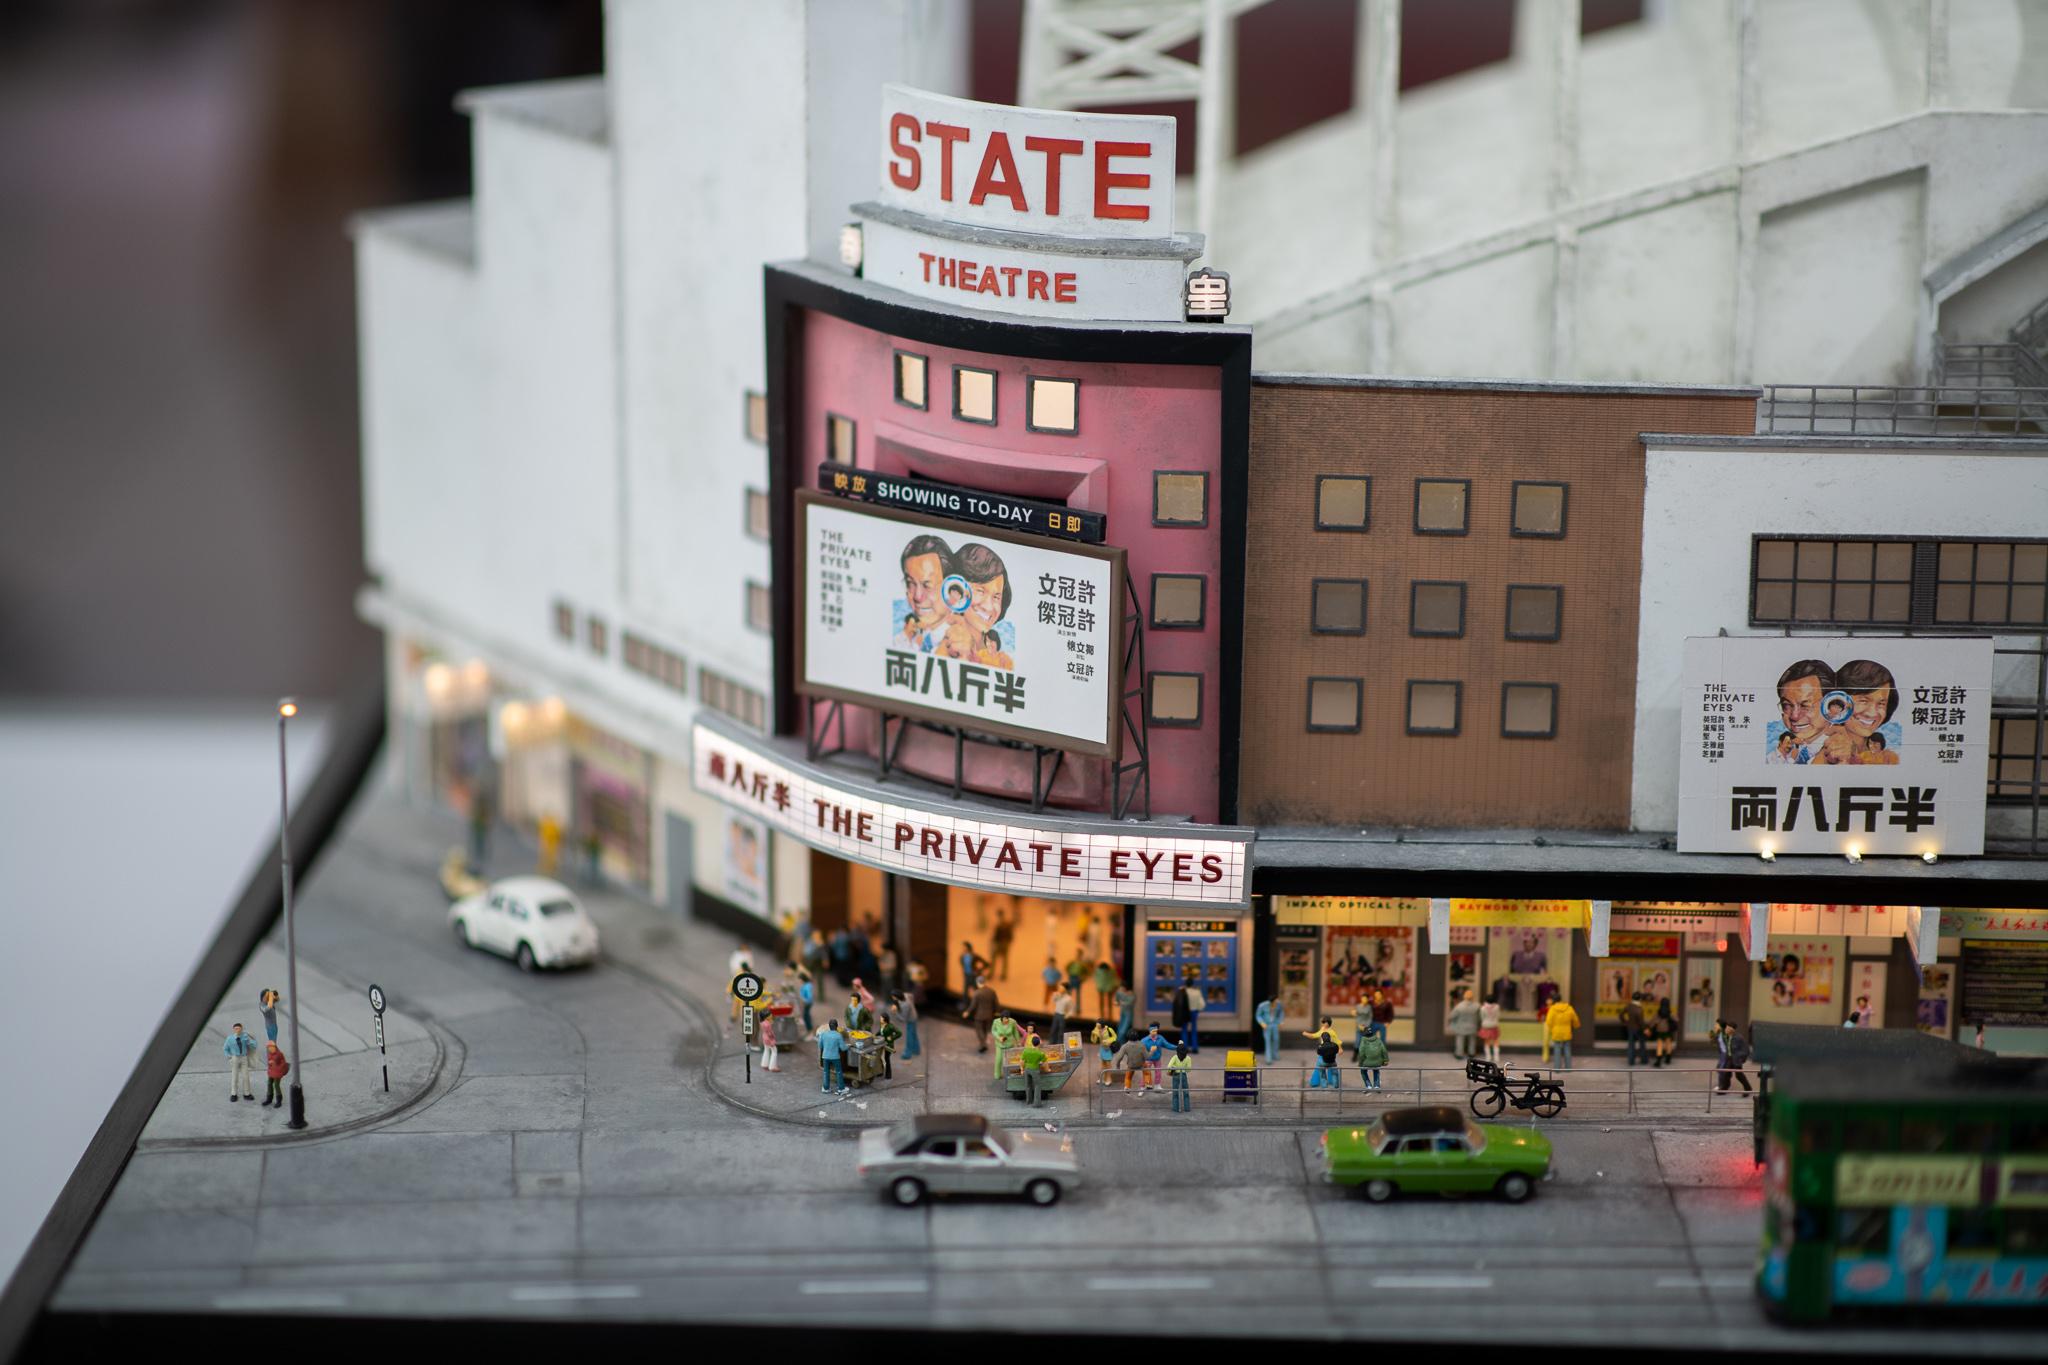 The "Hong Kong: Through the Looking Glass" miniature exhibition organised by the Hong Kong Economic and Trade Office in Singapore opened in Singapore today (April 4). The exhibition features 40 miniature models based on diversified facets of Hong Kong life. Photo shows a miniature model of the State Theatre.
